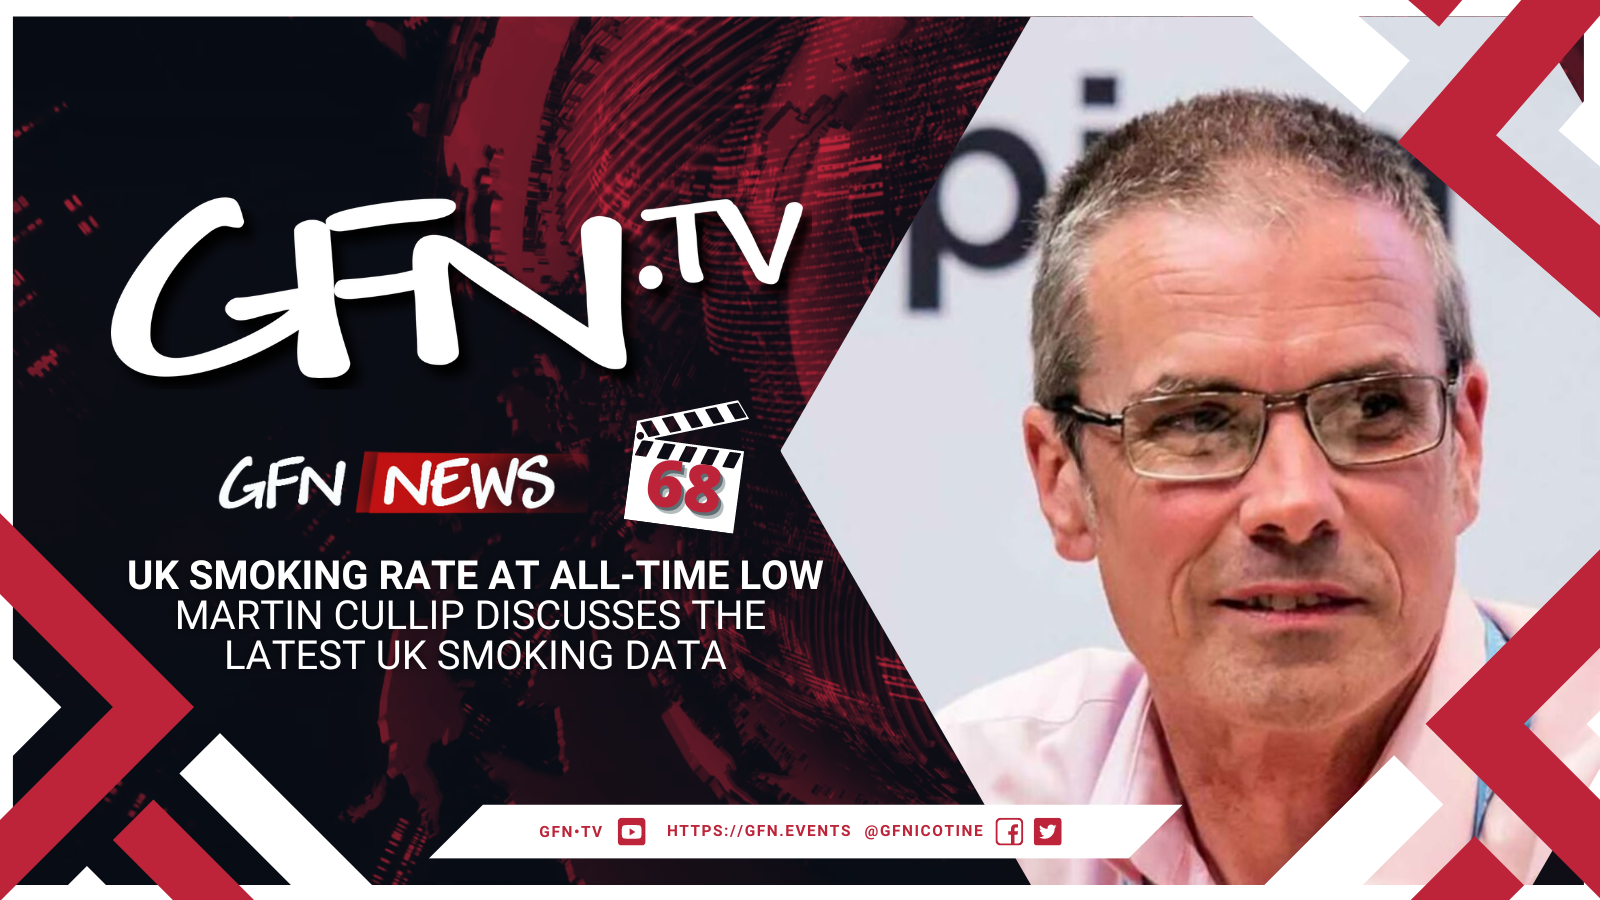 GFN News #68 | UK SMOKING RATE AT ALL-TIME LOW | Martin Cullip discusses the latest UK smoking data